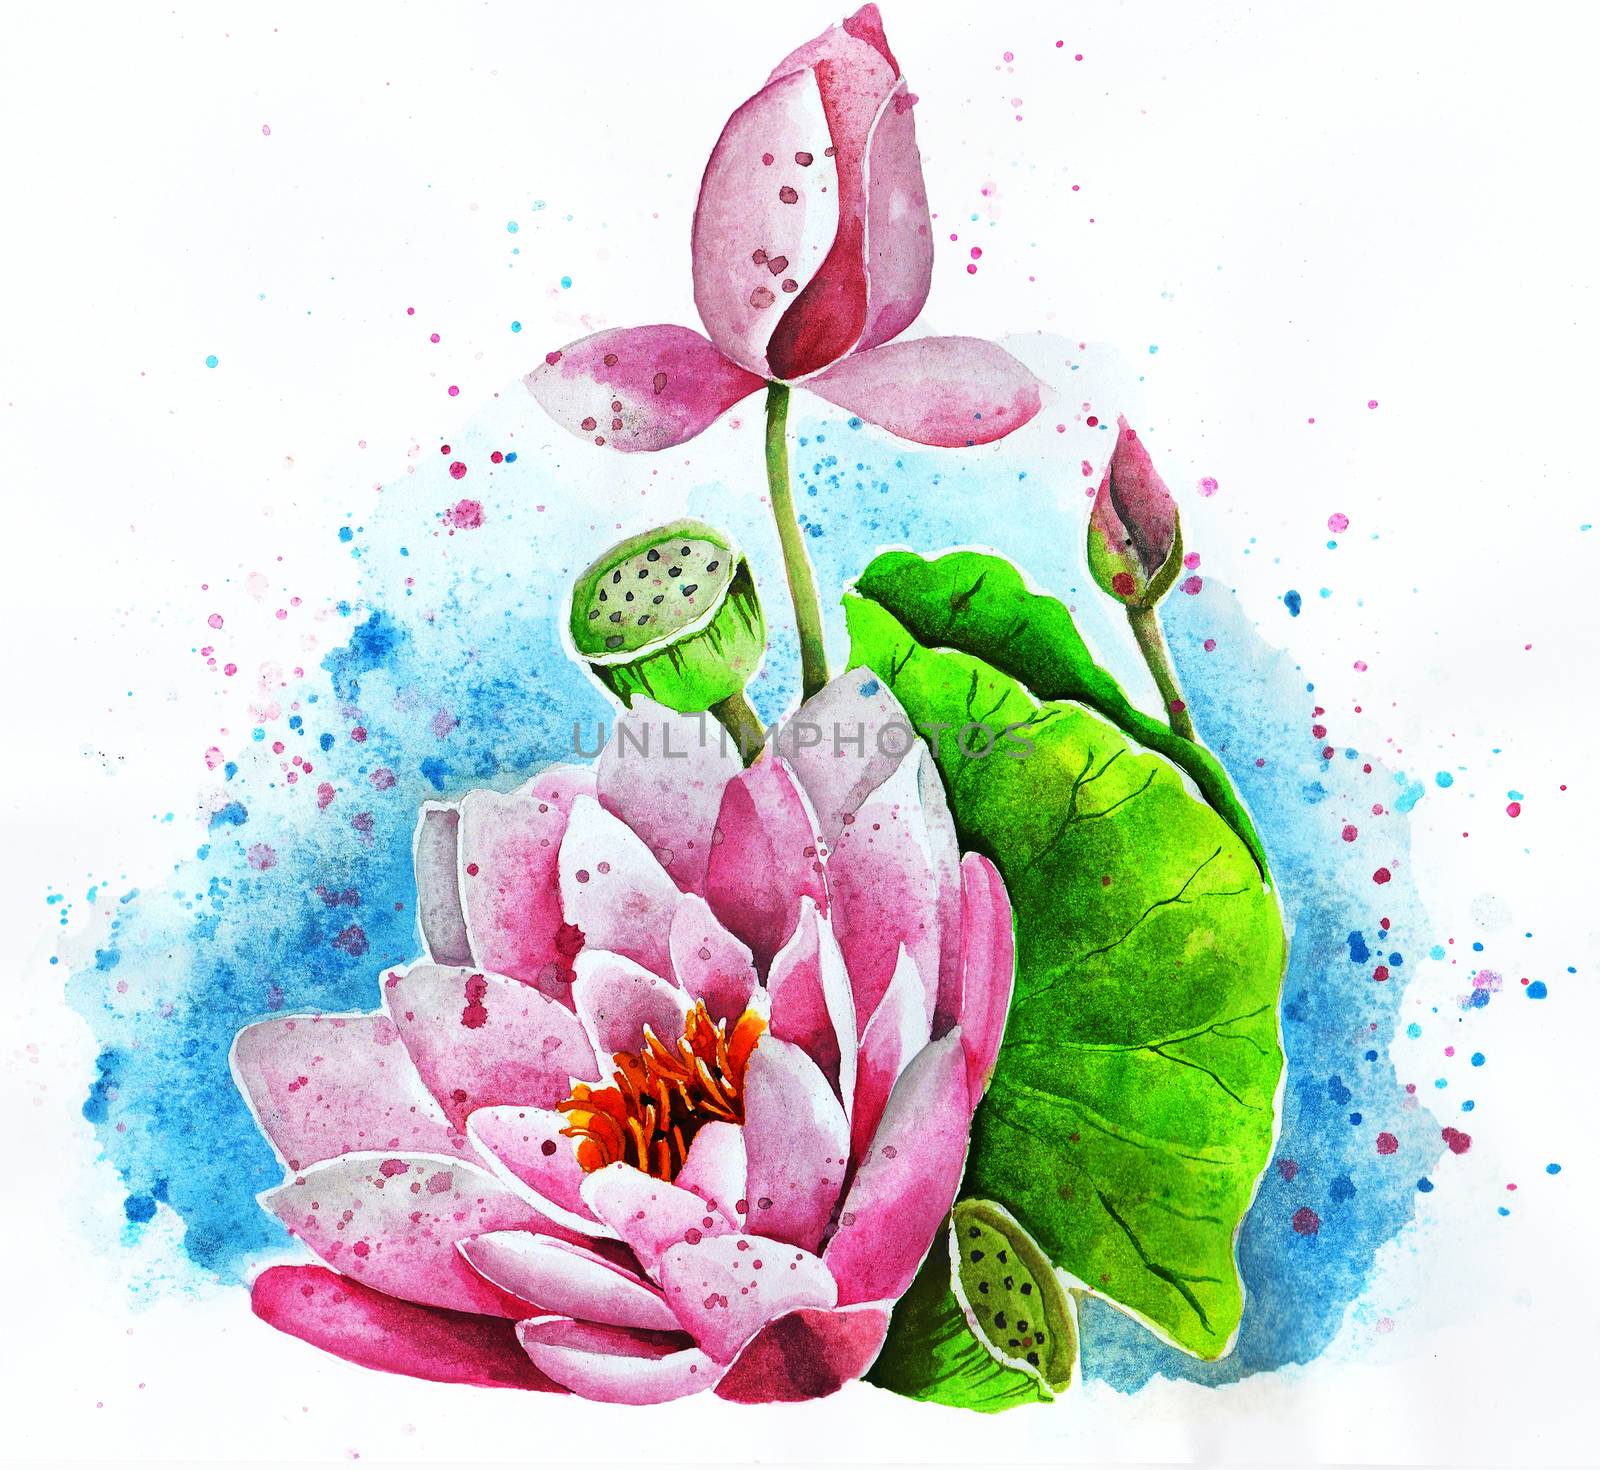 Lotus flower on a white background watercolor drawing